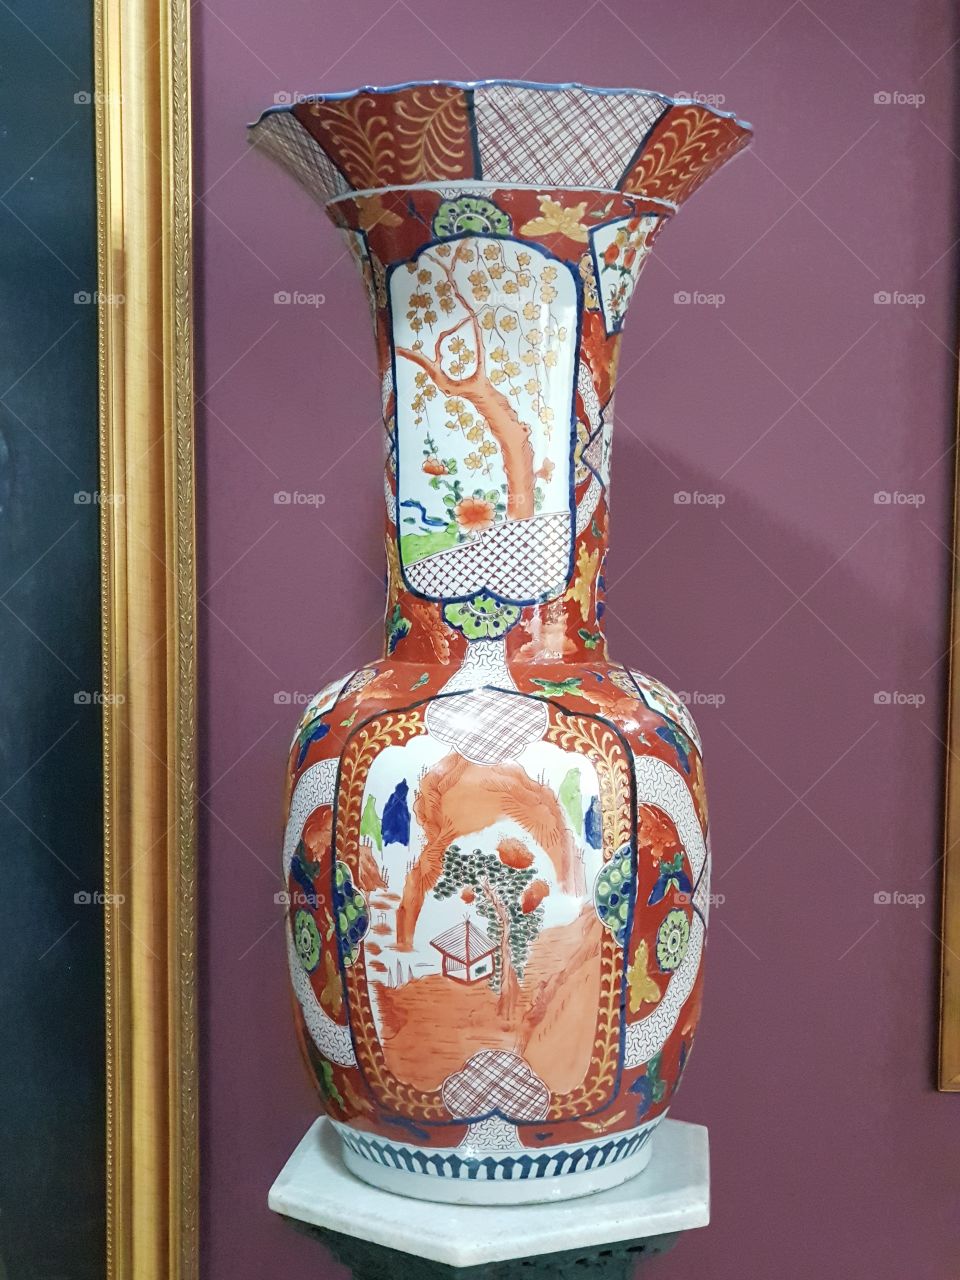 Ancient porcelain jars from China Dinasty